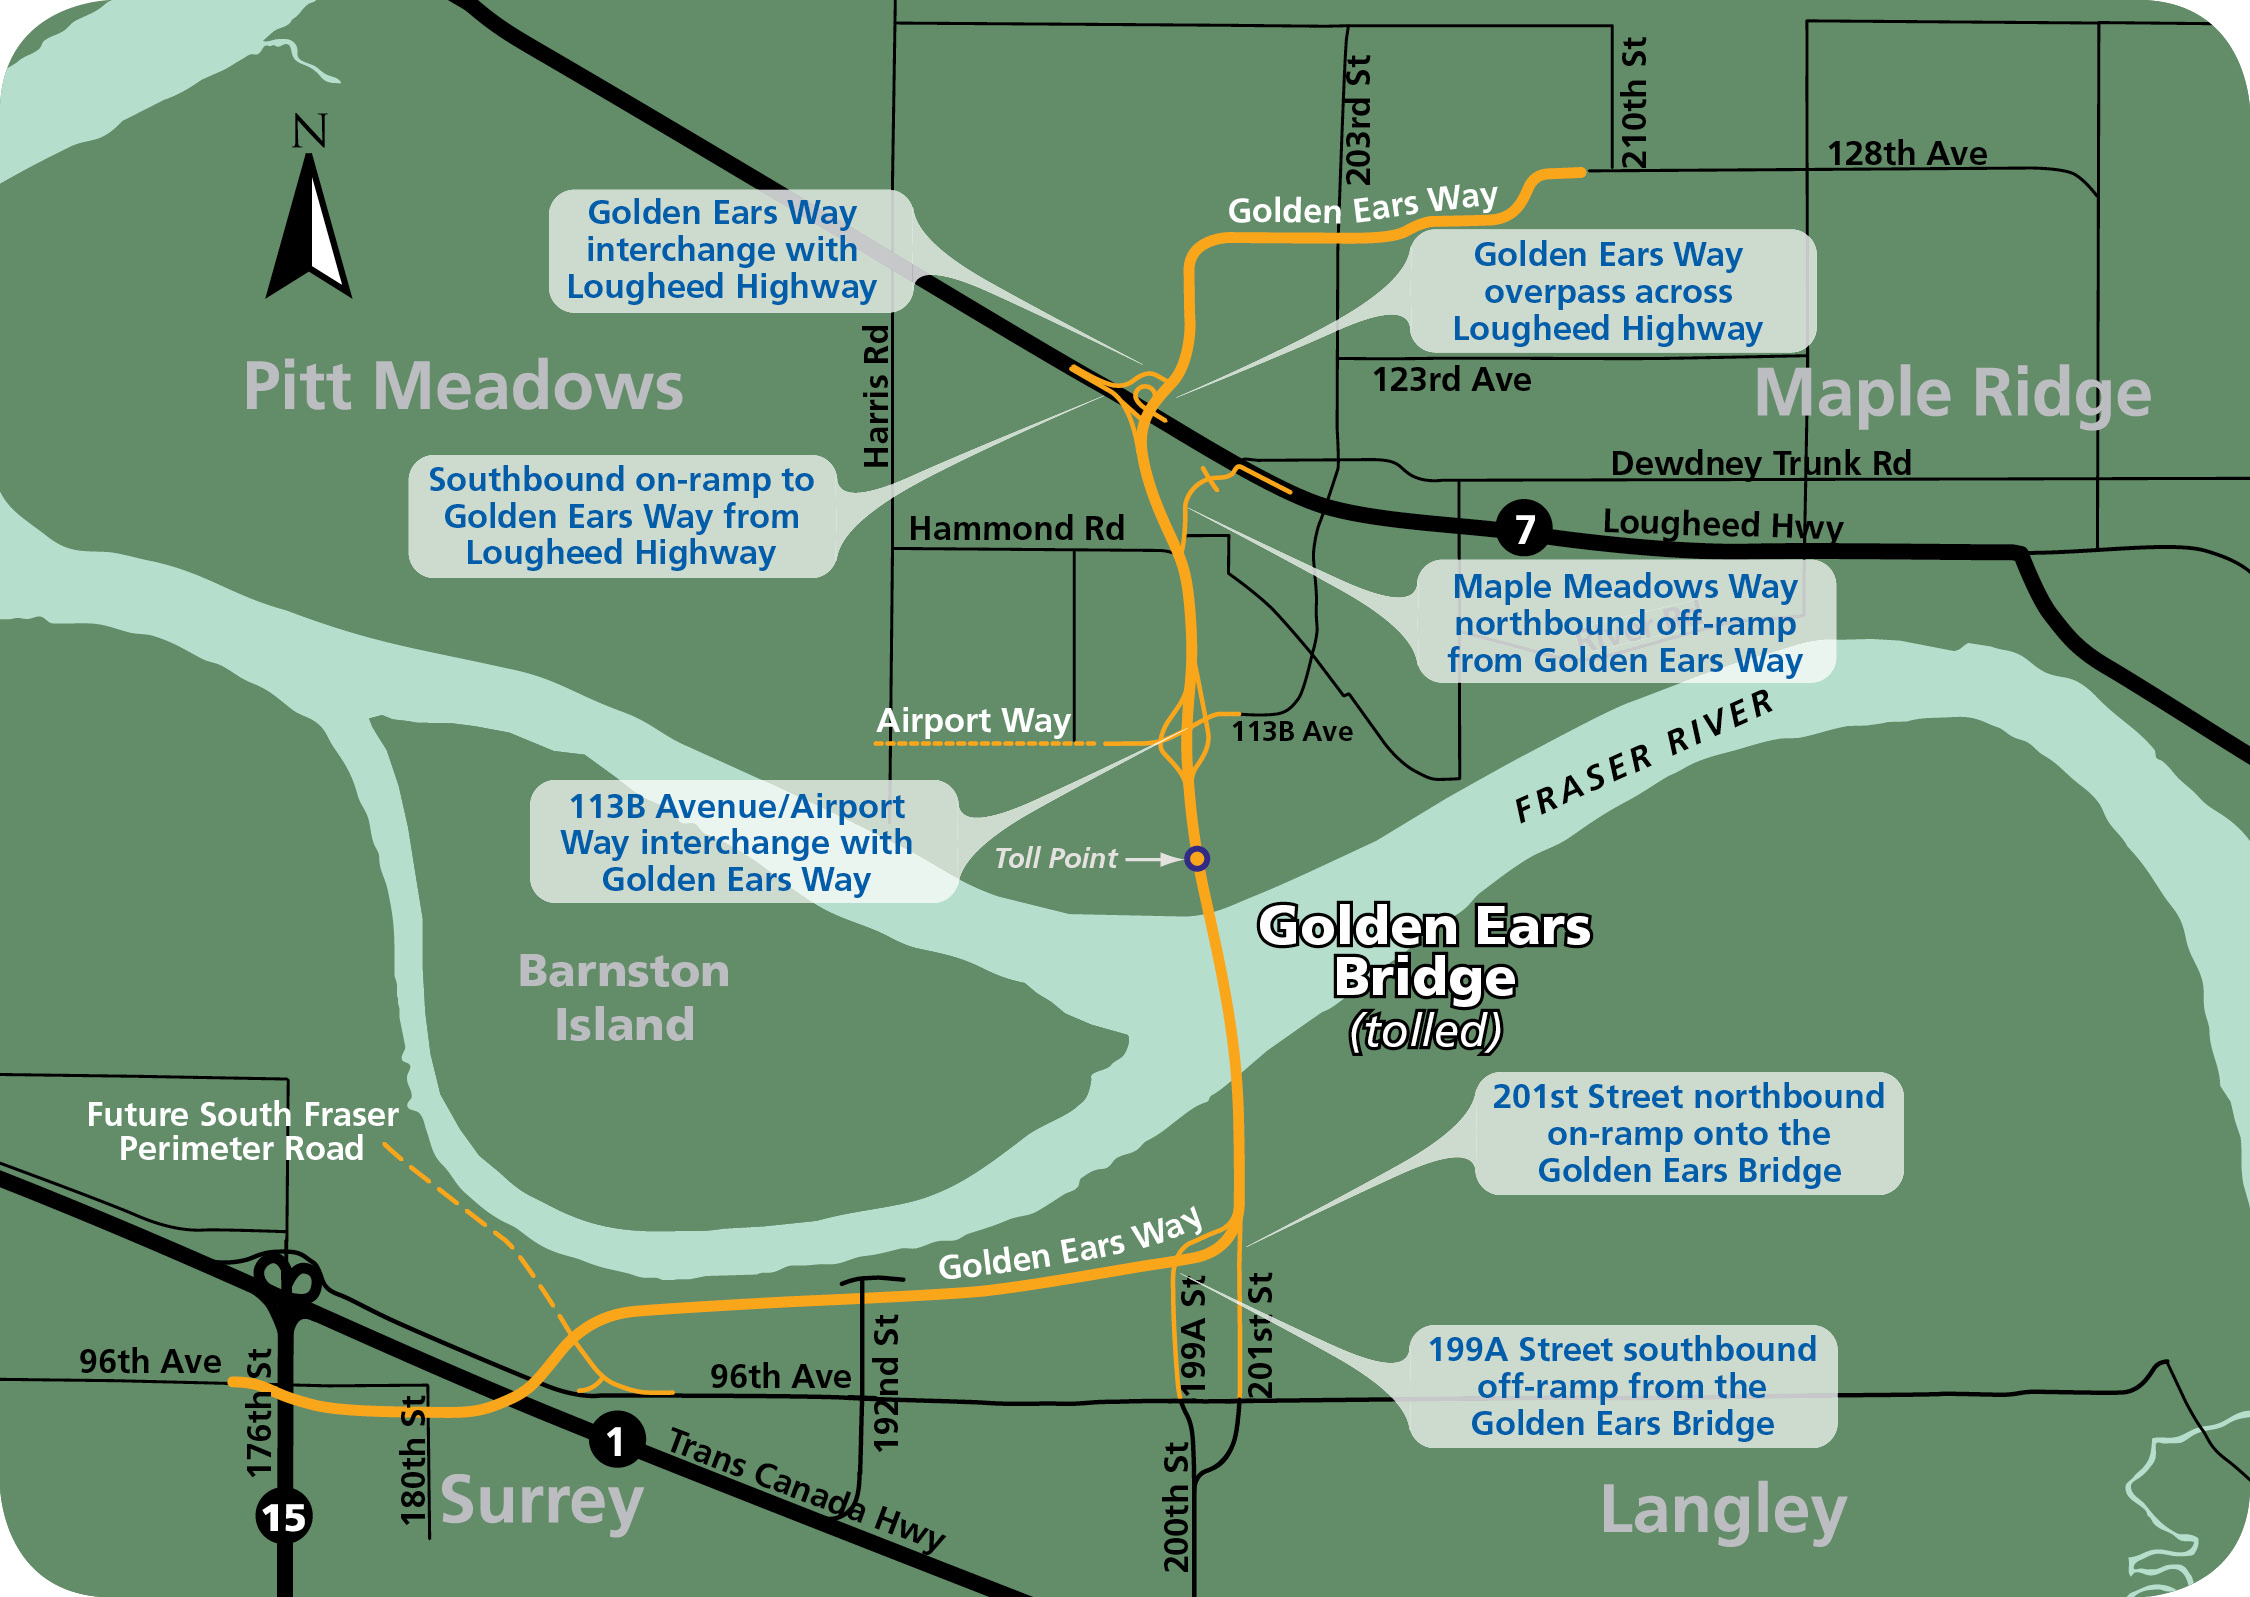 A map of the connections to the Golden Ears Bridge, once the bridge is open. Click for a larger version.